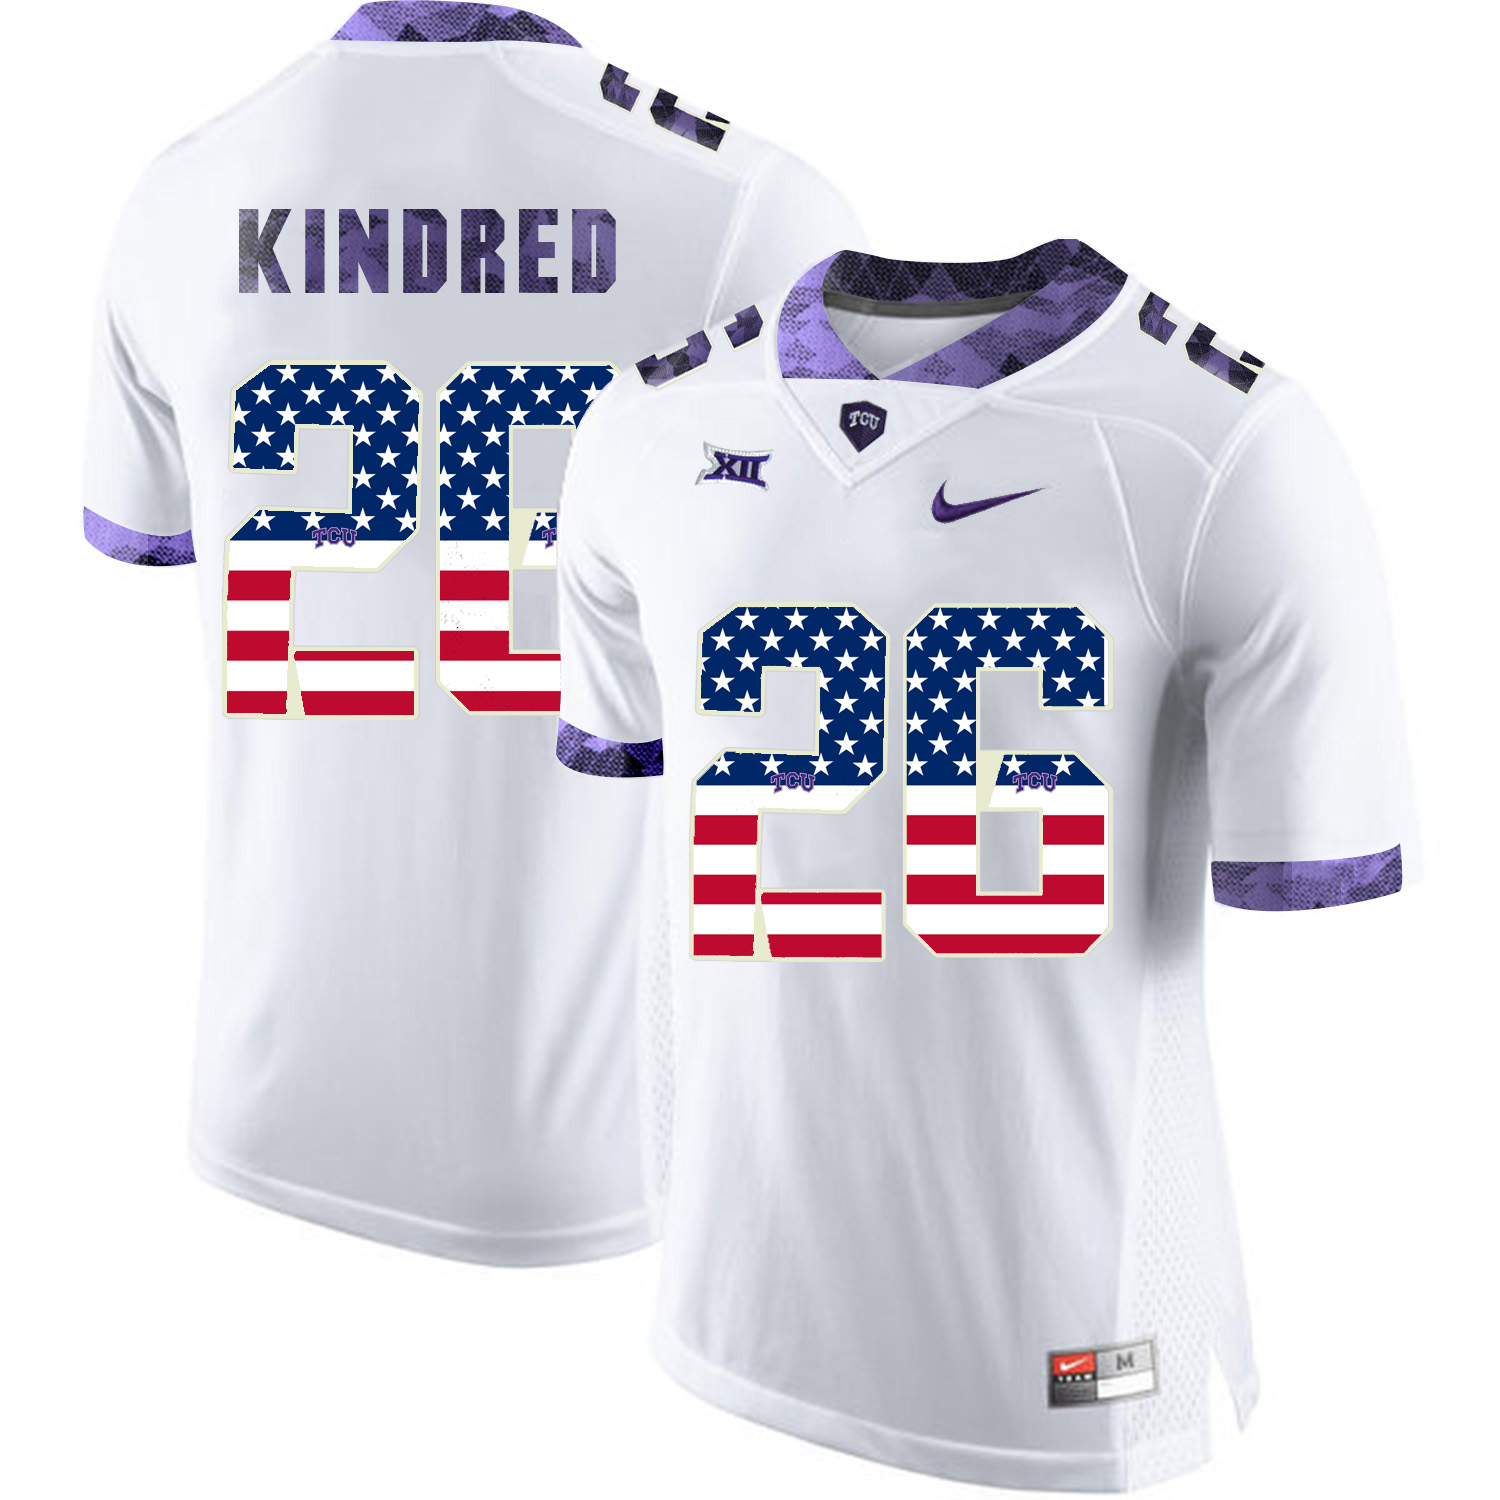 TCU Horned Frogs 26 Derrick Kindred White USA Flag College Football Jersey